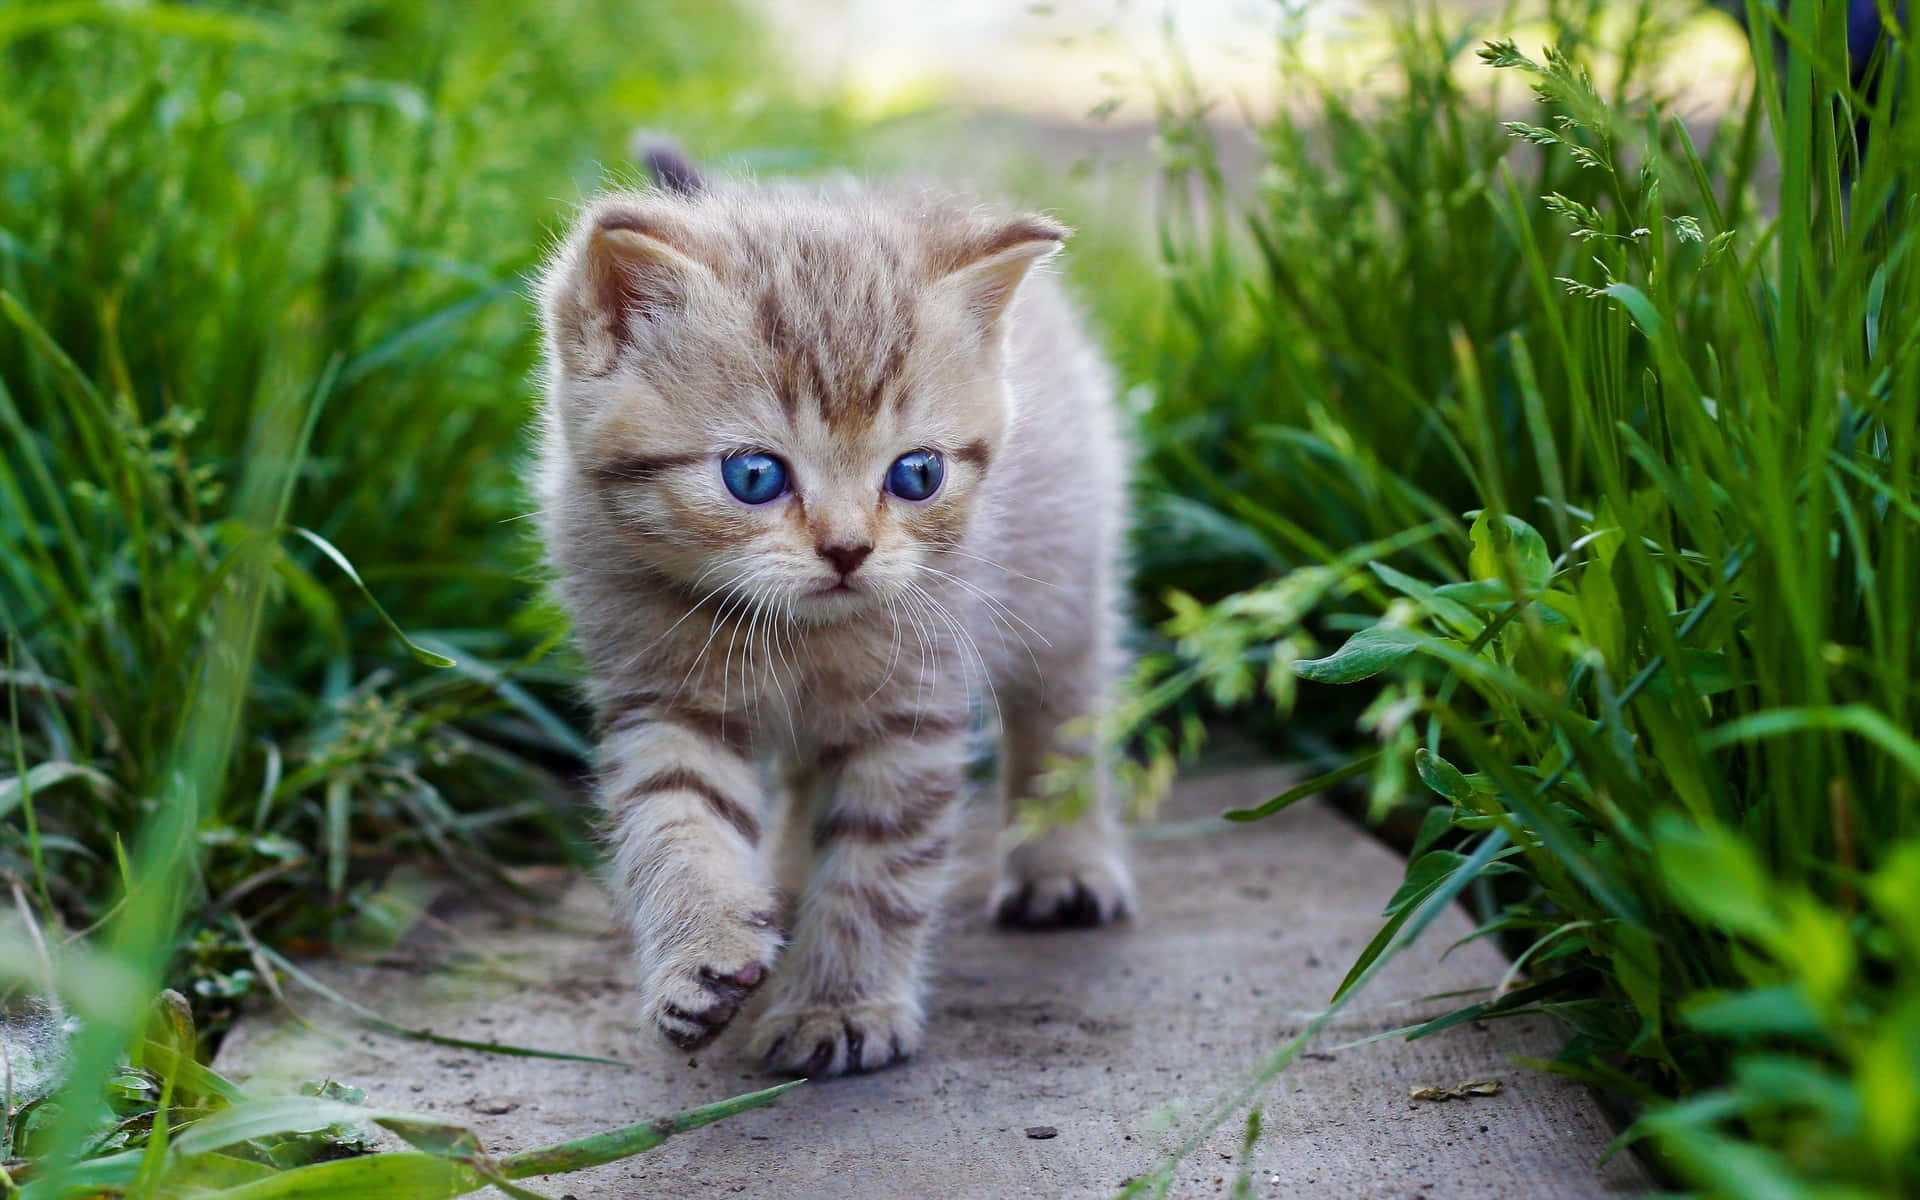 Adorable Baby Cat